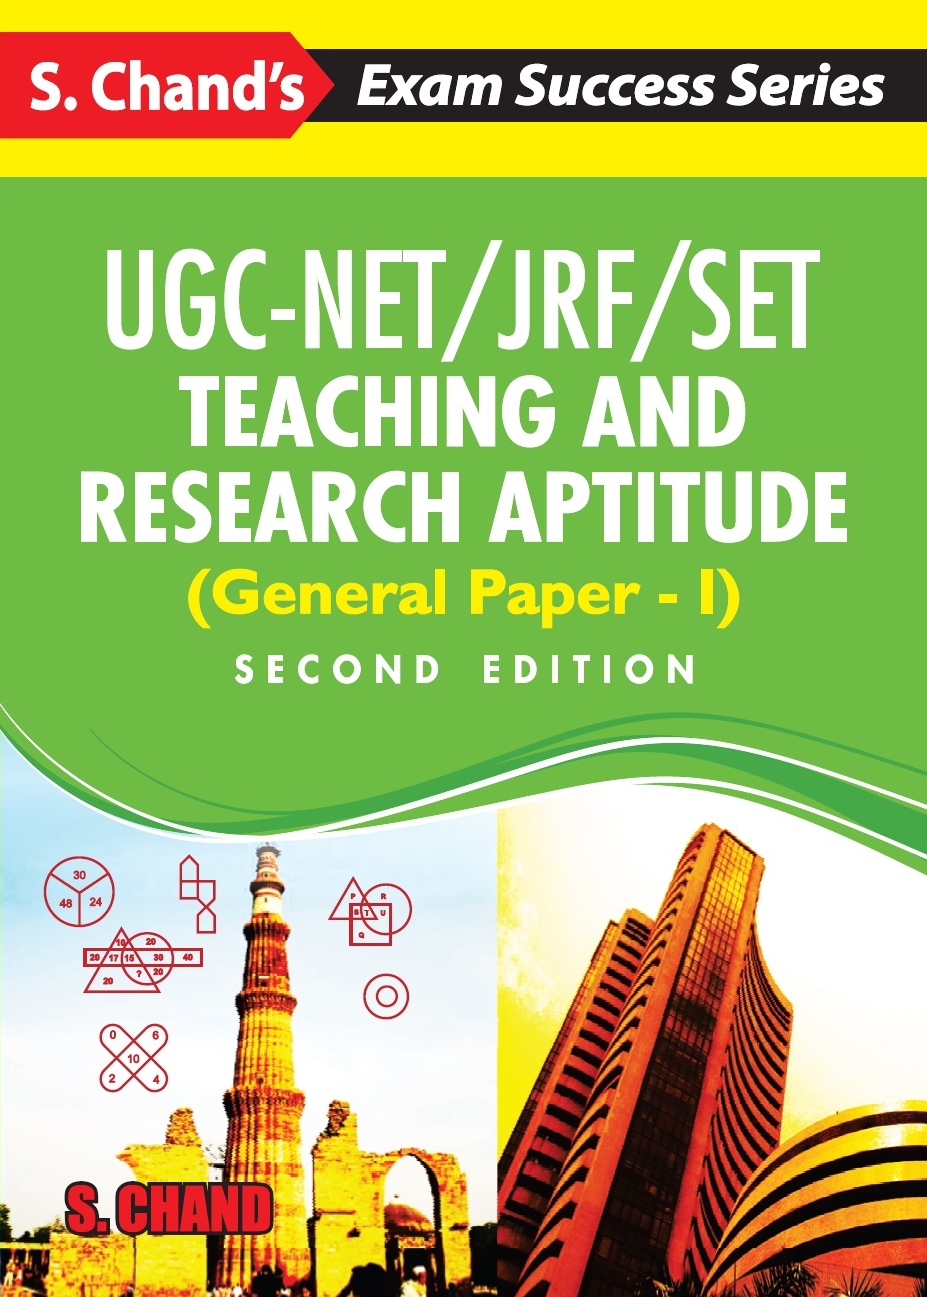 UGC-NET/JRF/SET TEACHING AND RESEARCH APTITUDE (GENERAL PAPER - I)